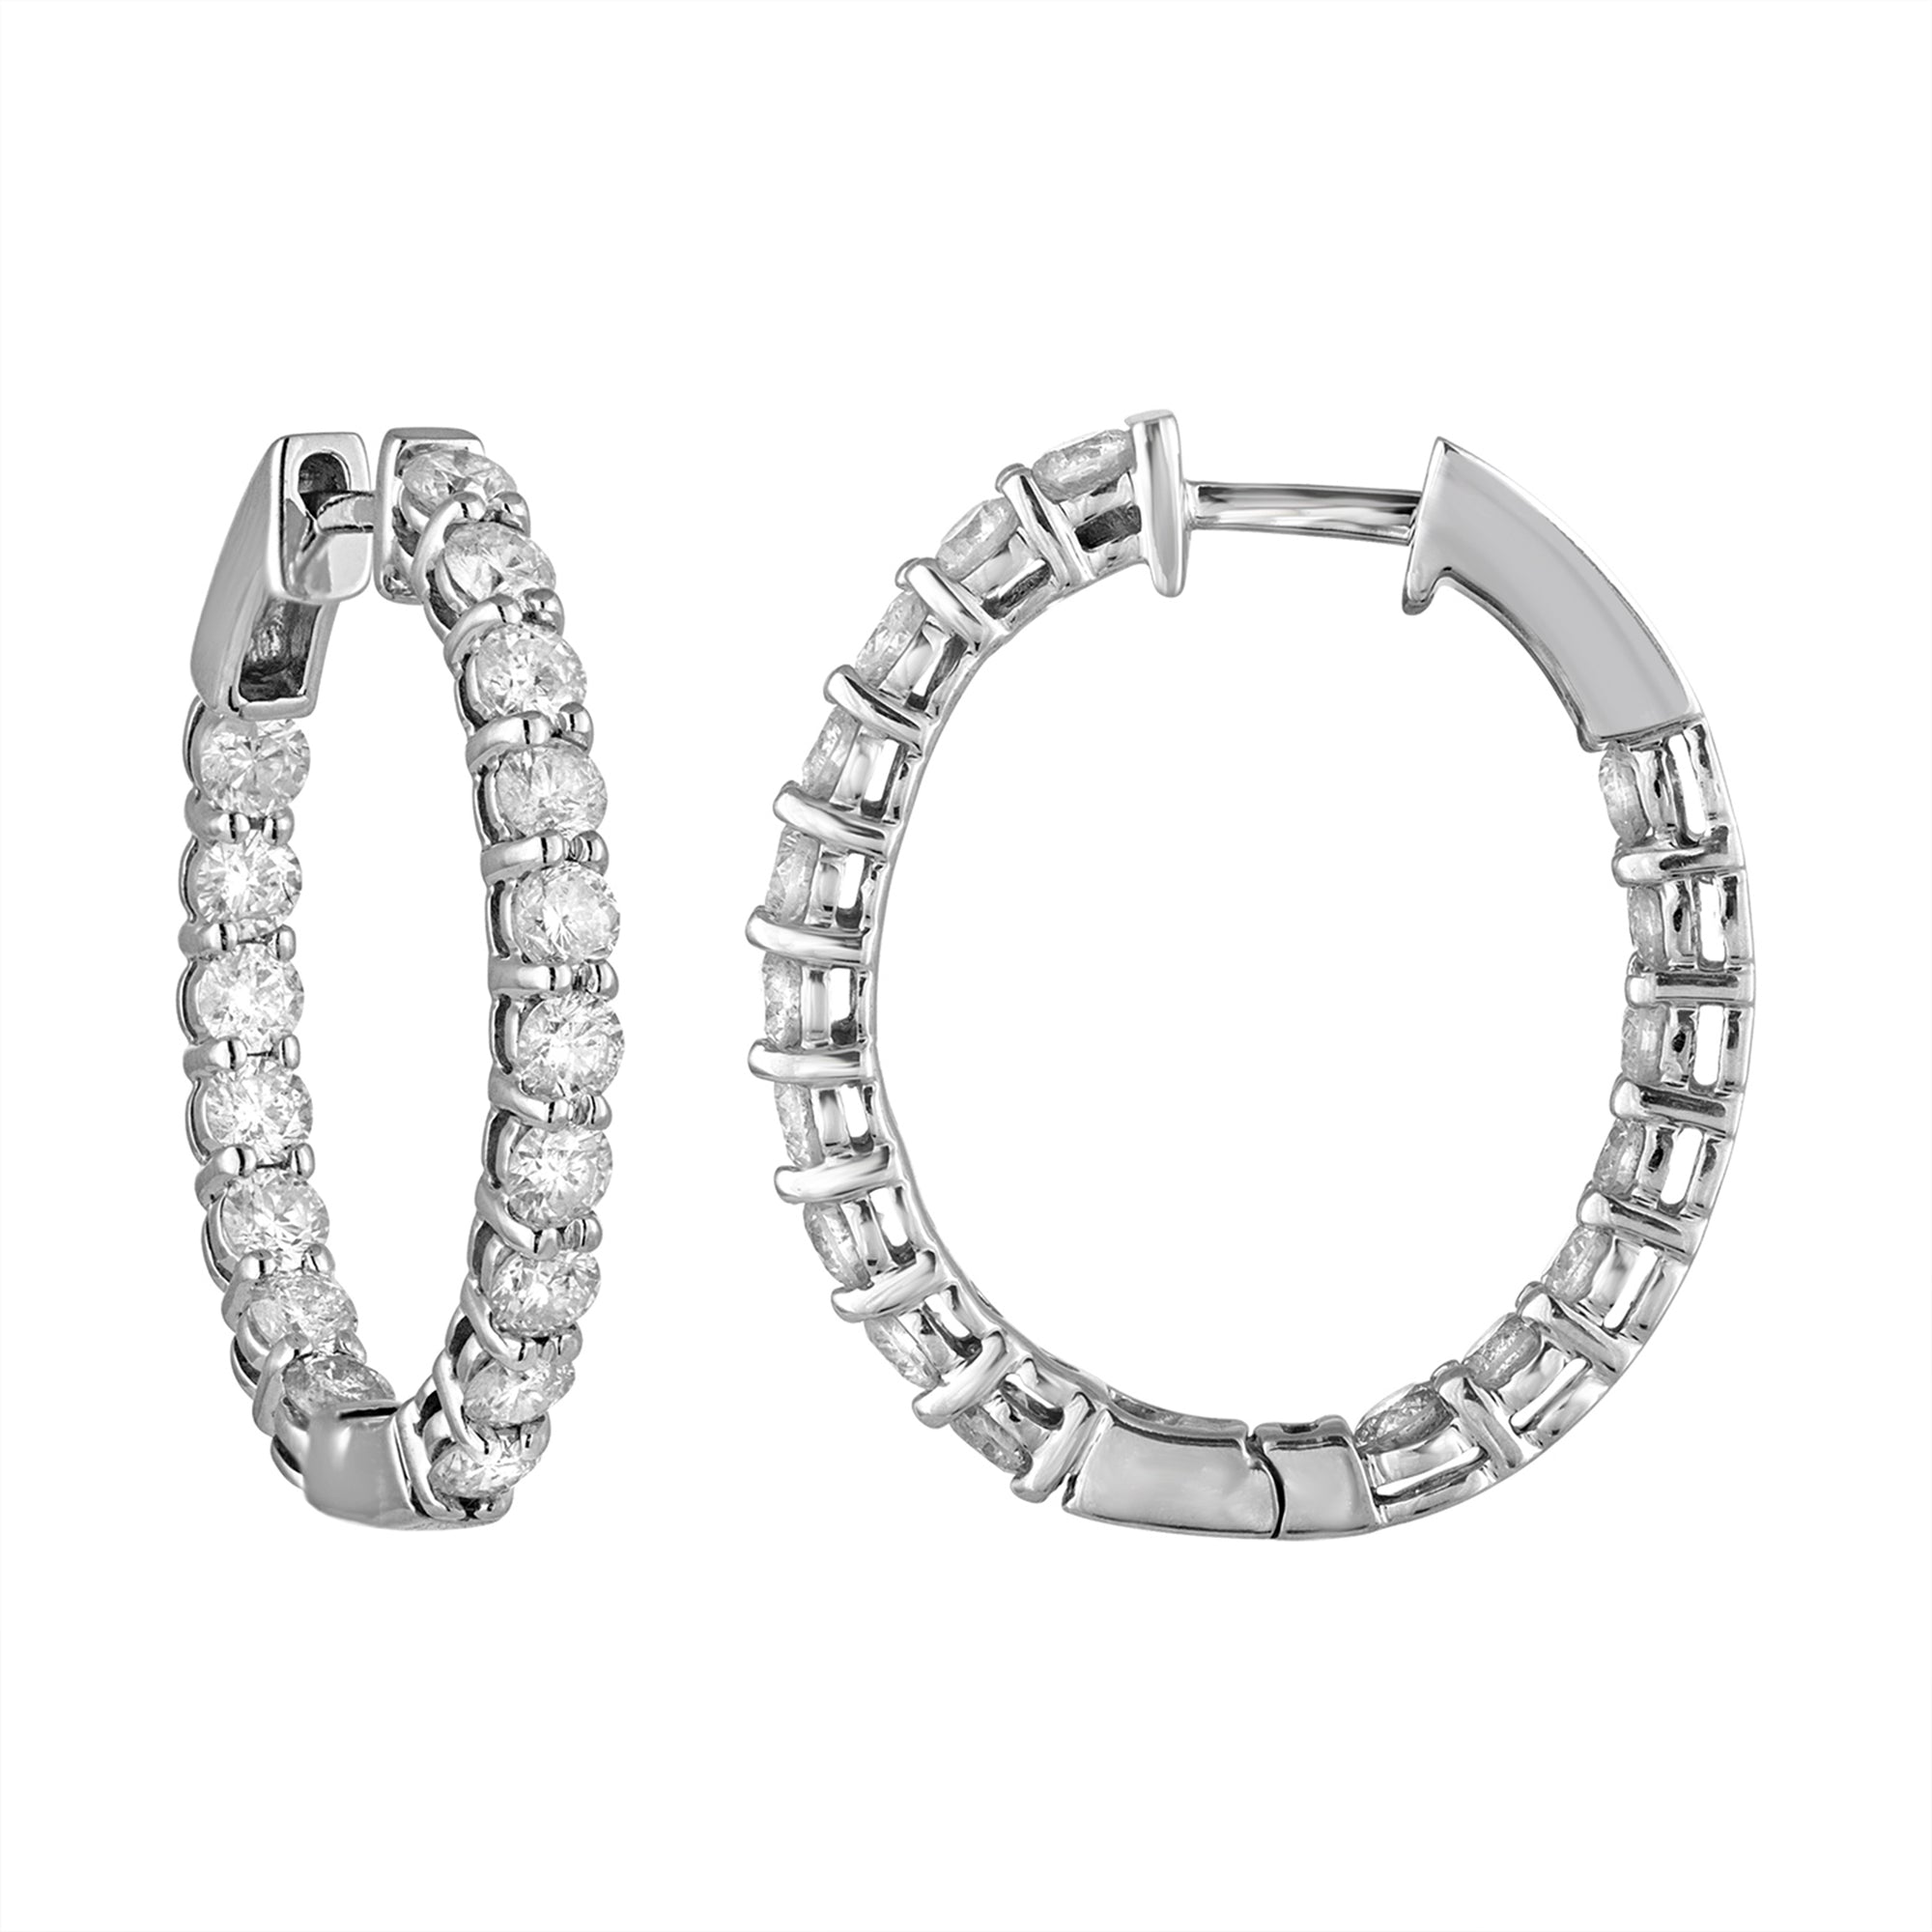 4 cttw Diamond Inside Out Hoop Earrings 14K White Gold Round Prong Set 1 inch